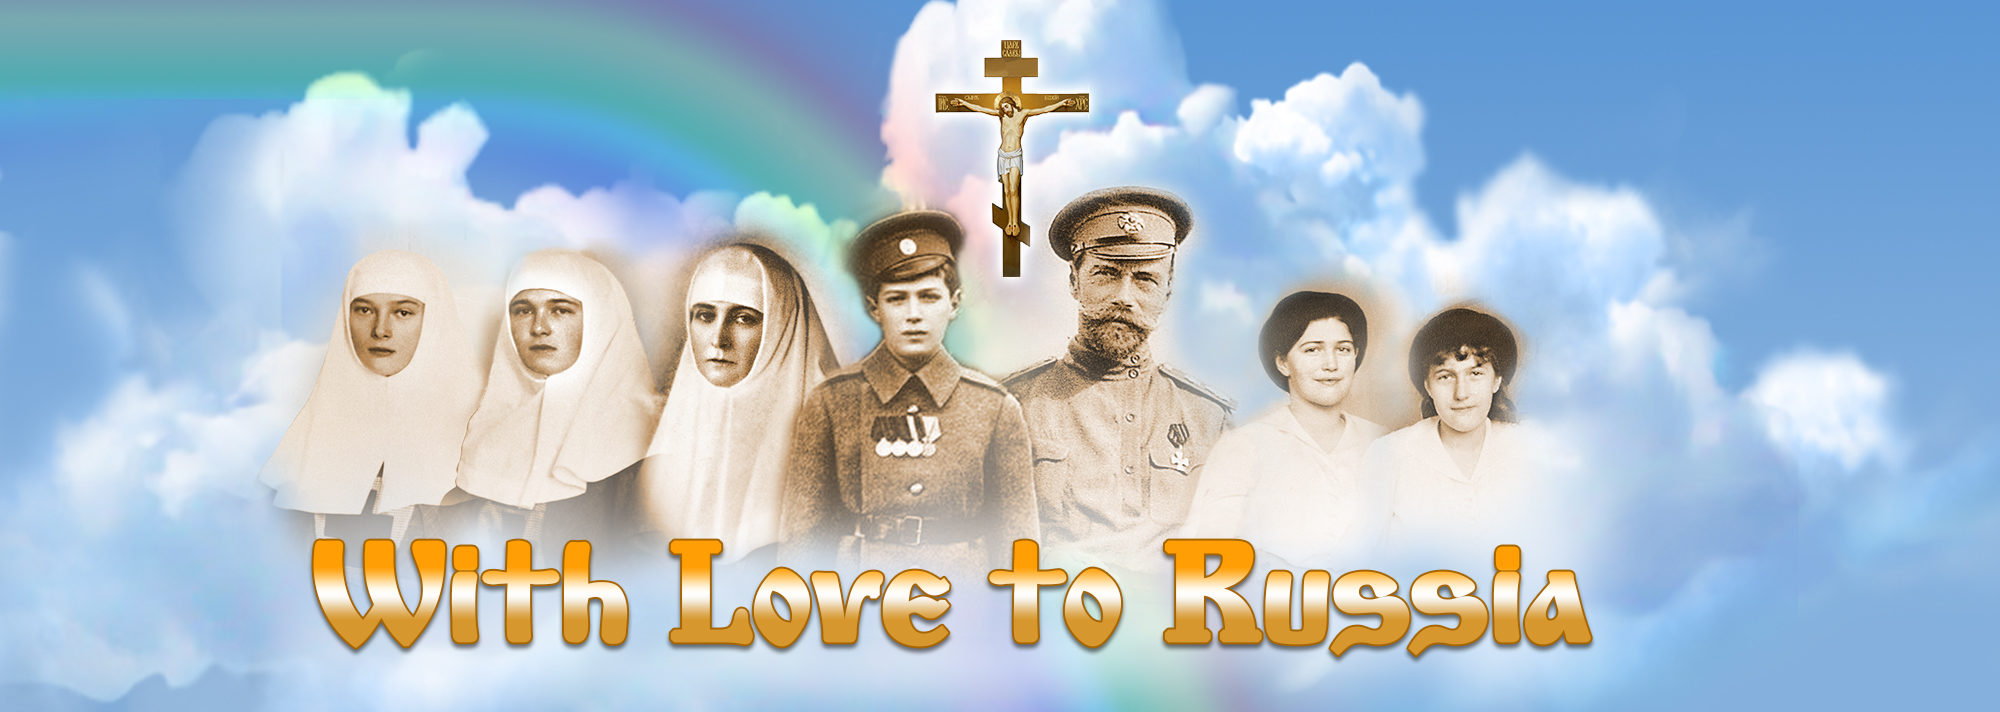 With Love to Russia